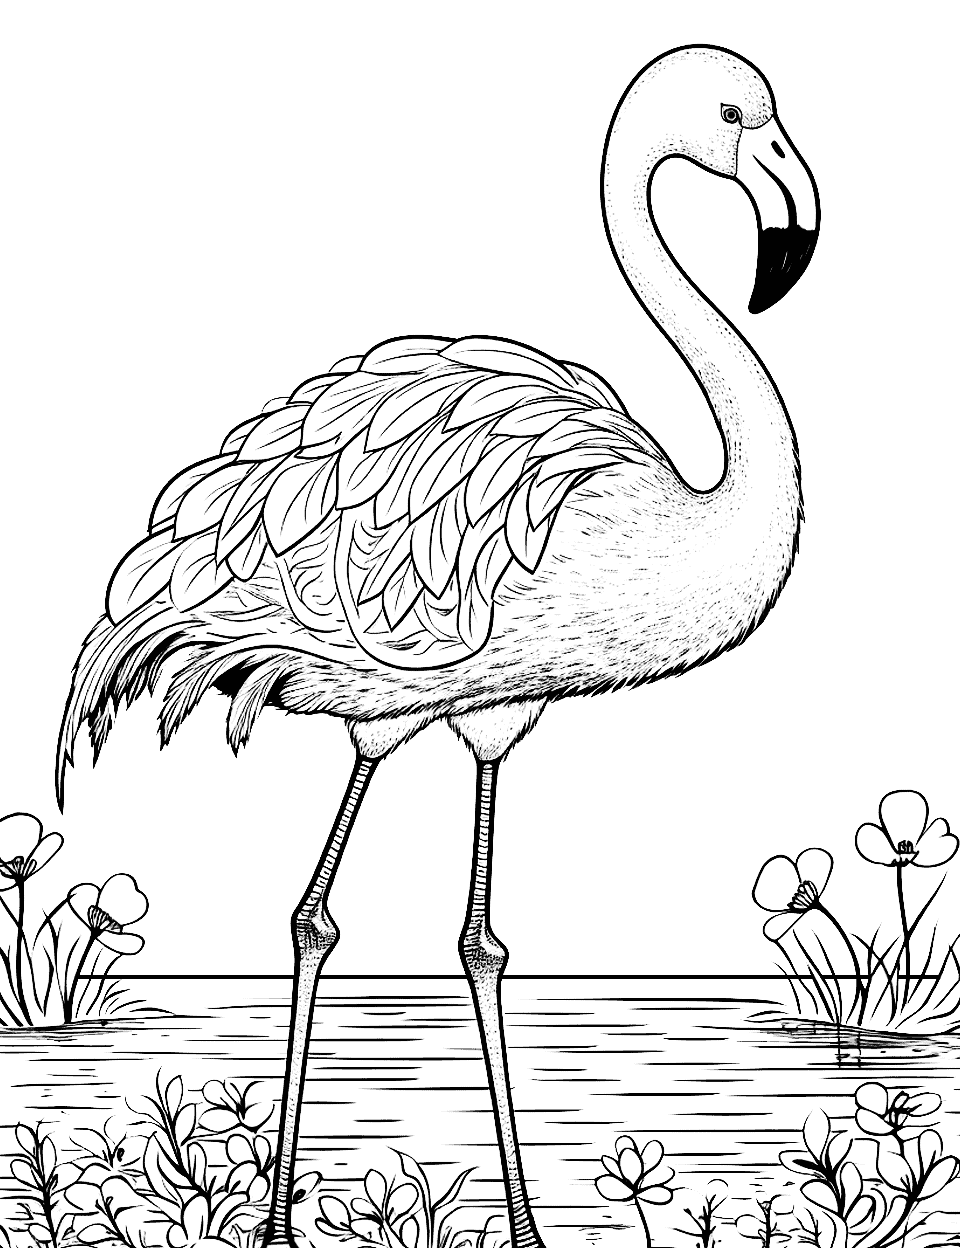 Small Detailed Flamingo On a Pond Coloring Page - A small detailed flamingo walking near the edge of a pond.